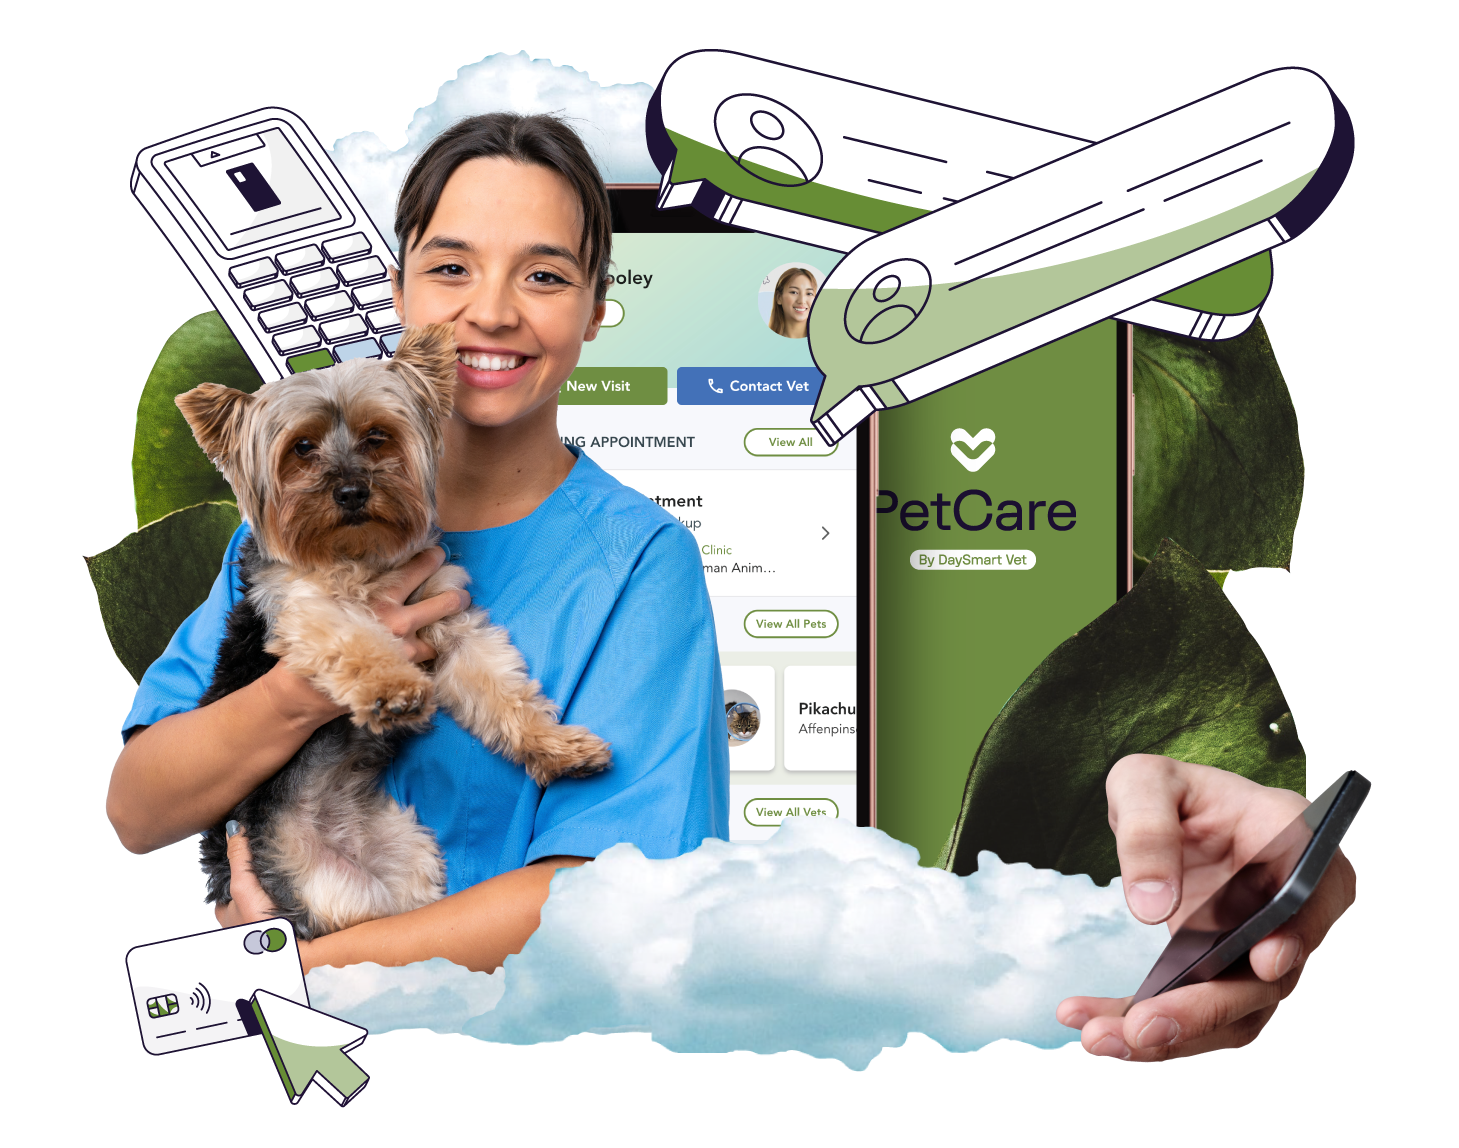 DaySmart Vet offers add-ons for payments and billing, two-way texting, and a pet parent PetCare app.